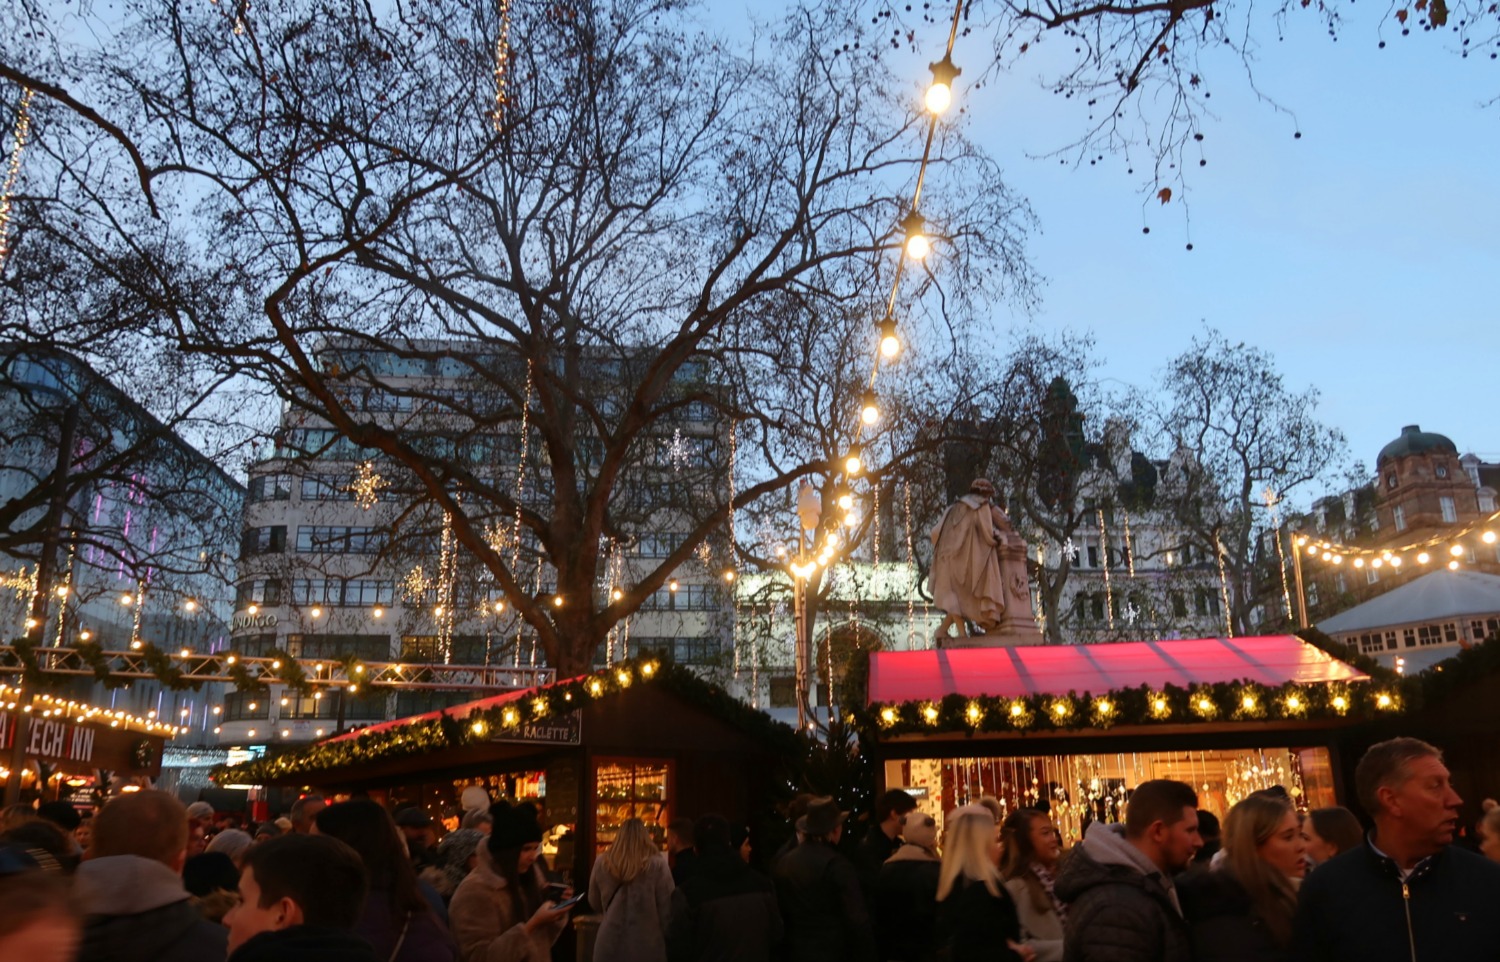 Leicester-Square-at-Christmas-Christmas-market